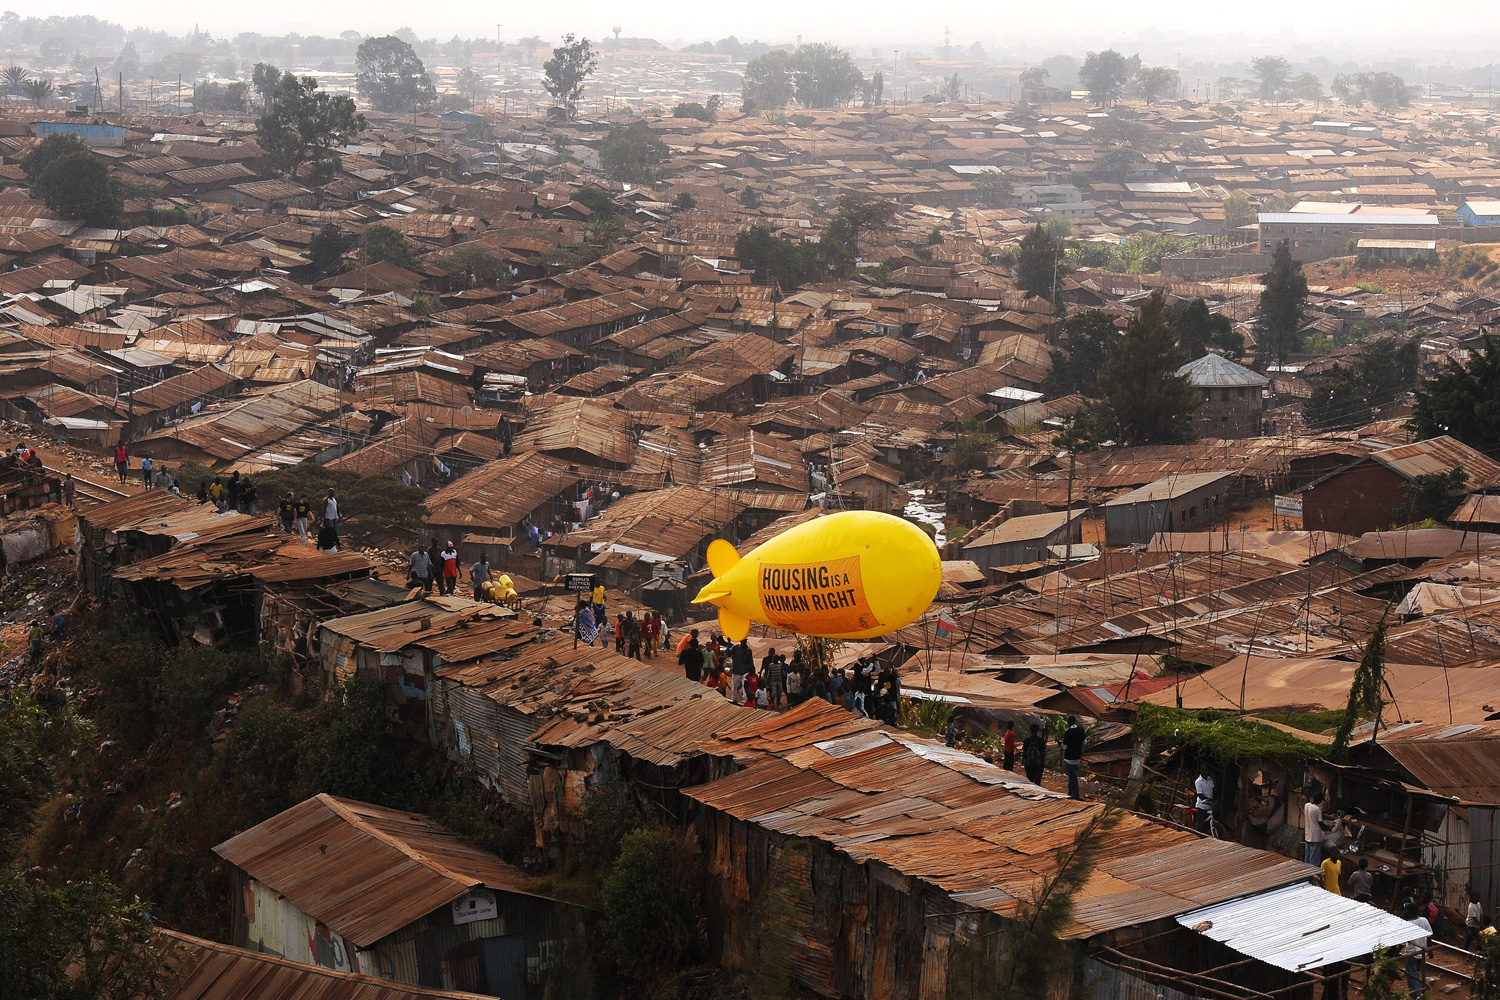 March 24, 2012. Members of Amnesty International carry a hot air balloon with text that reads 'Housing is a Human right' through the Kibera slum in Nairobi.